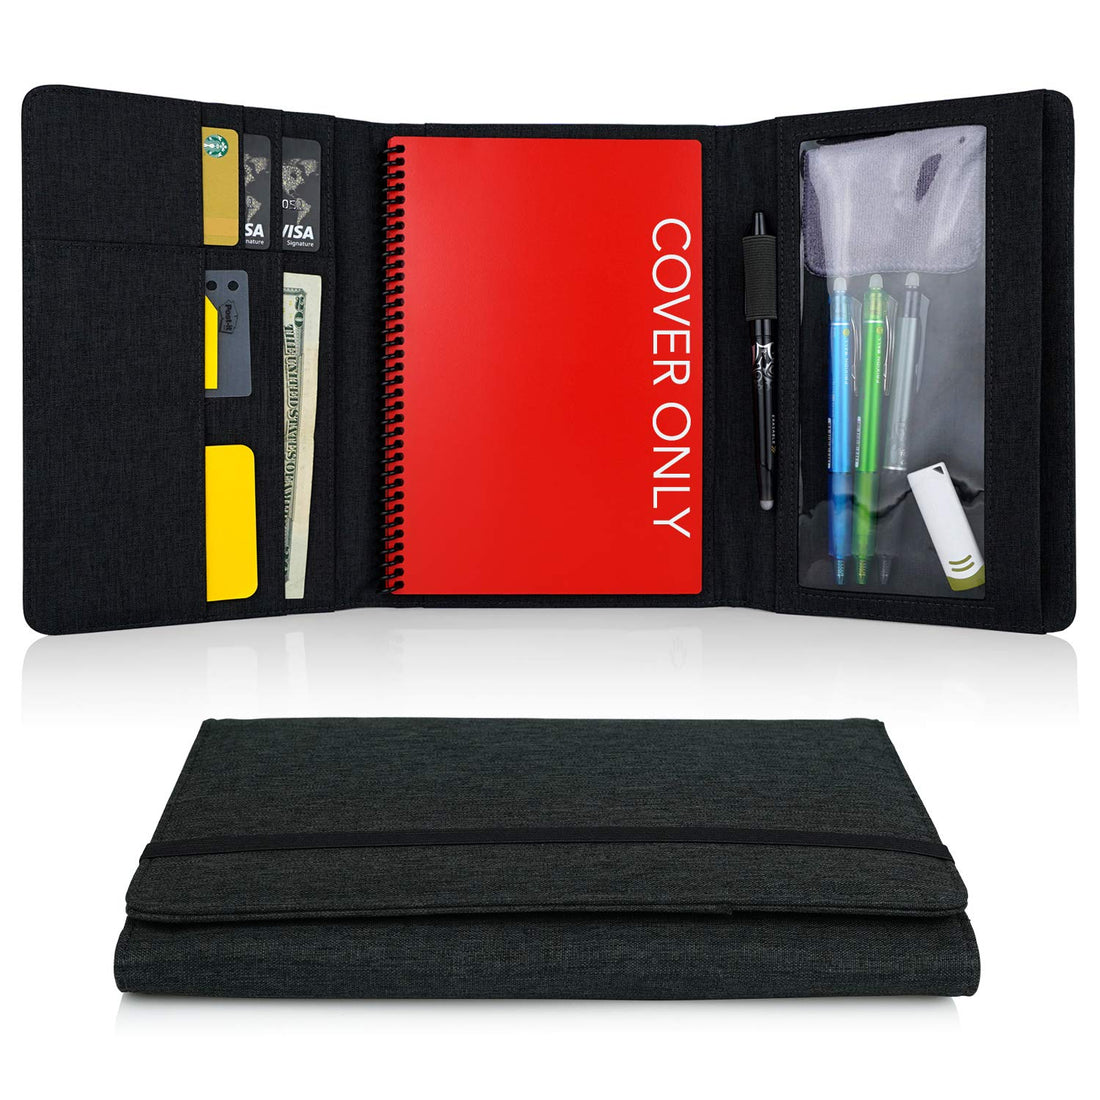 Folio Cover for Rocketbook Everlast Fusion - Executive Size, Waterproof Fabric, Multi Organizer with Pen Loop, Zipper Pocket, Business Card Holder, fits A5 size Notebook, 9 x 6 inch, Black